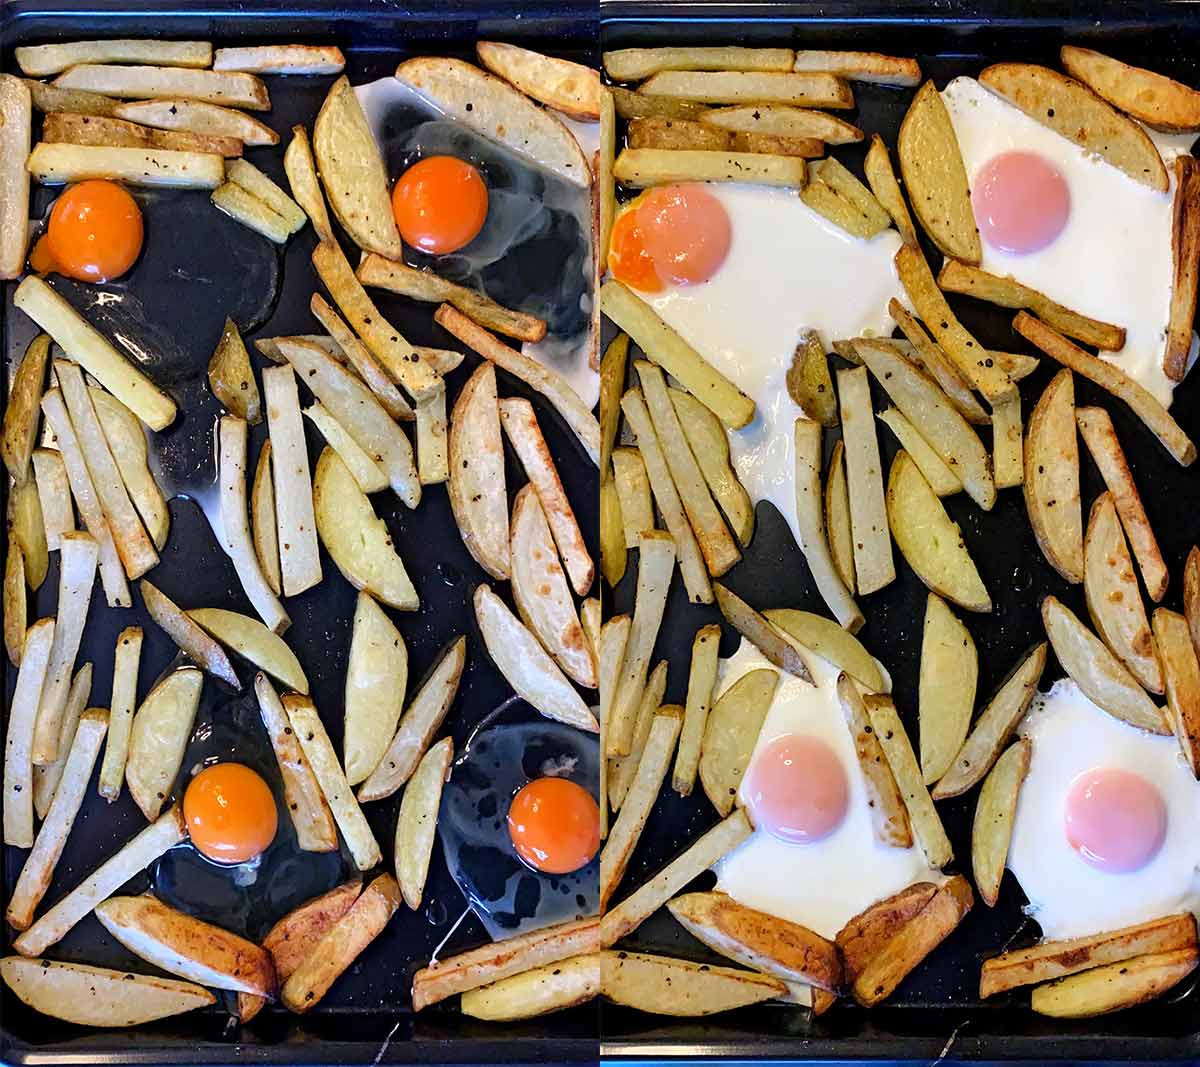 Four eggs added to the baking tray, shown before and after cooking.